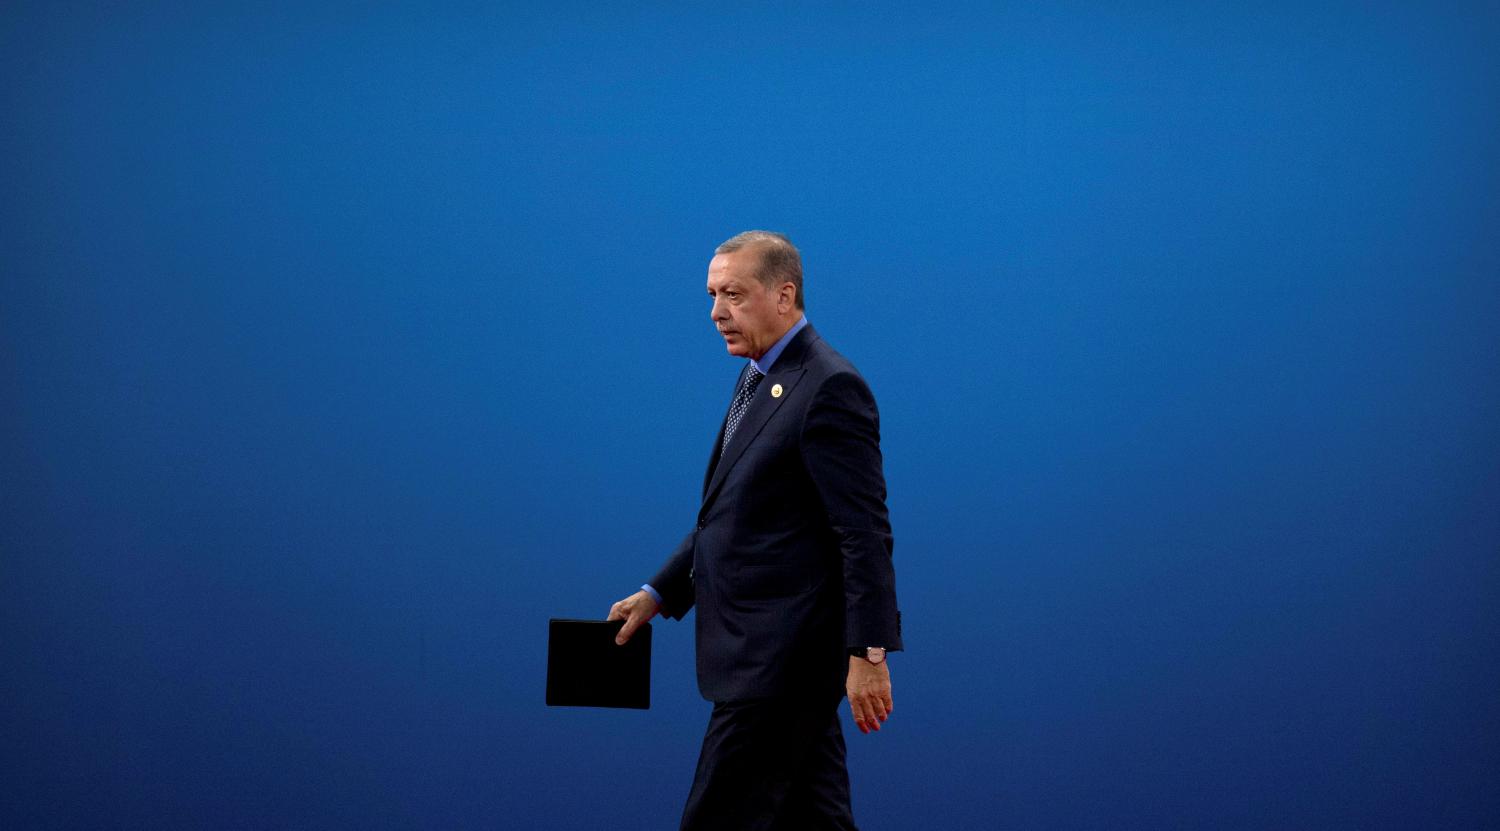 Turkey's President Tayyip Erdogan leaves the stage after speaking during the opening ceremony of the Belt and Road Forum at the China National Convention Center (CNCC) in Beijing, May 14, 2017. REUTERS/Mark Schiefelbein/Pool - RTX35Q7O